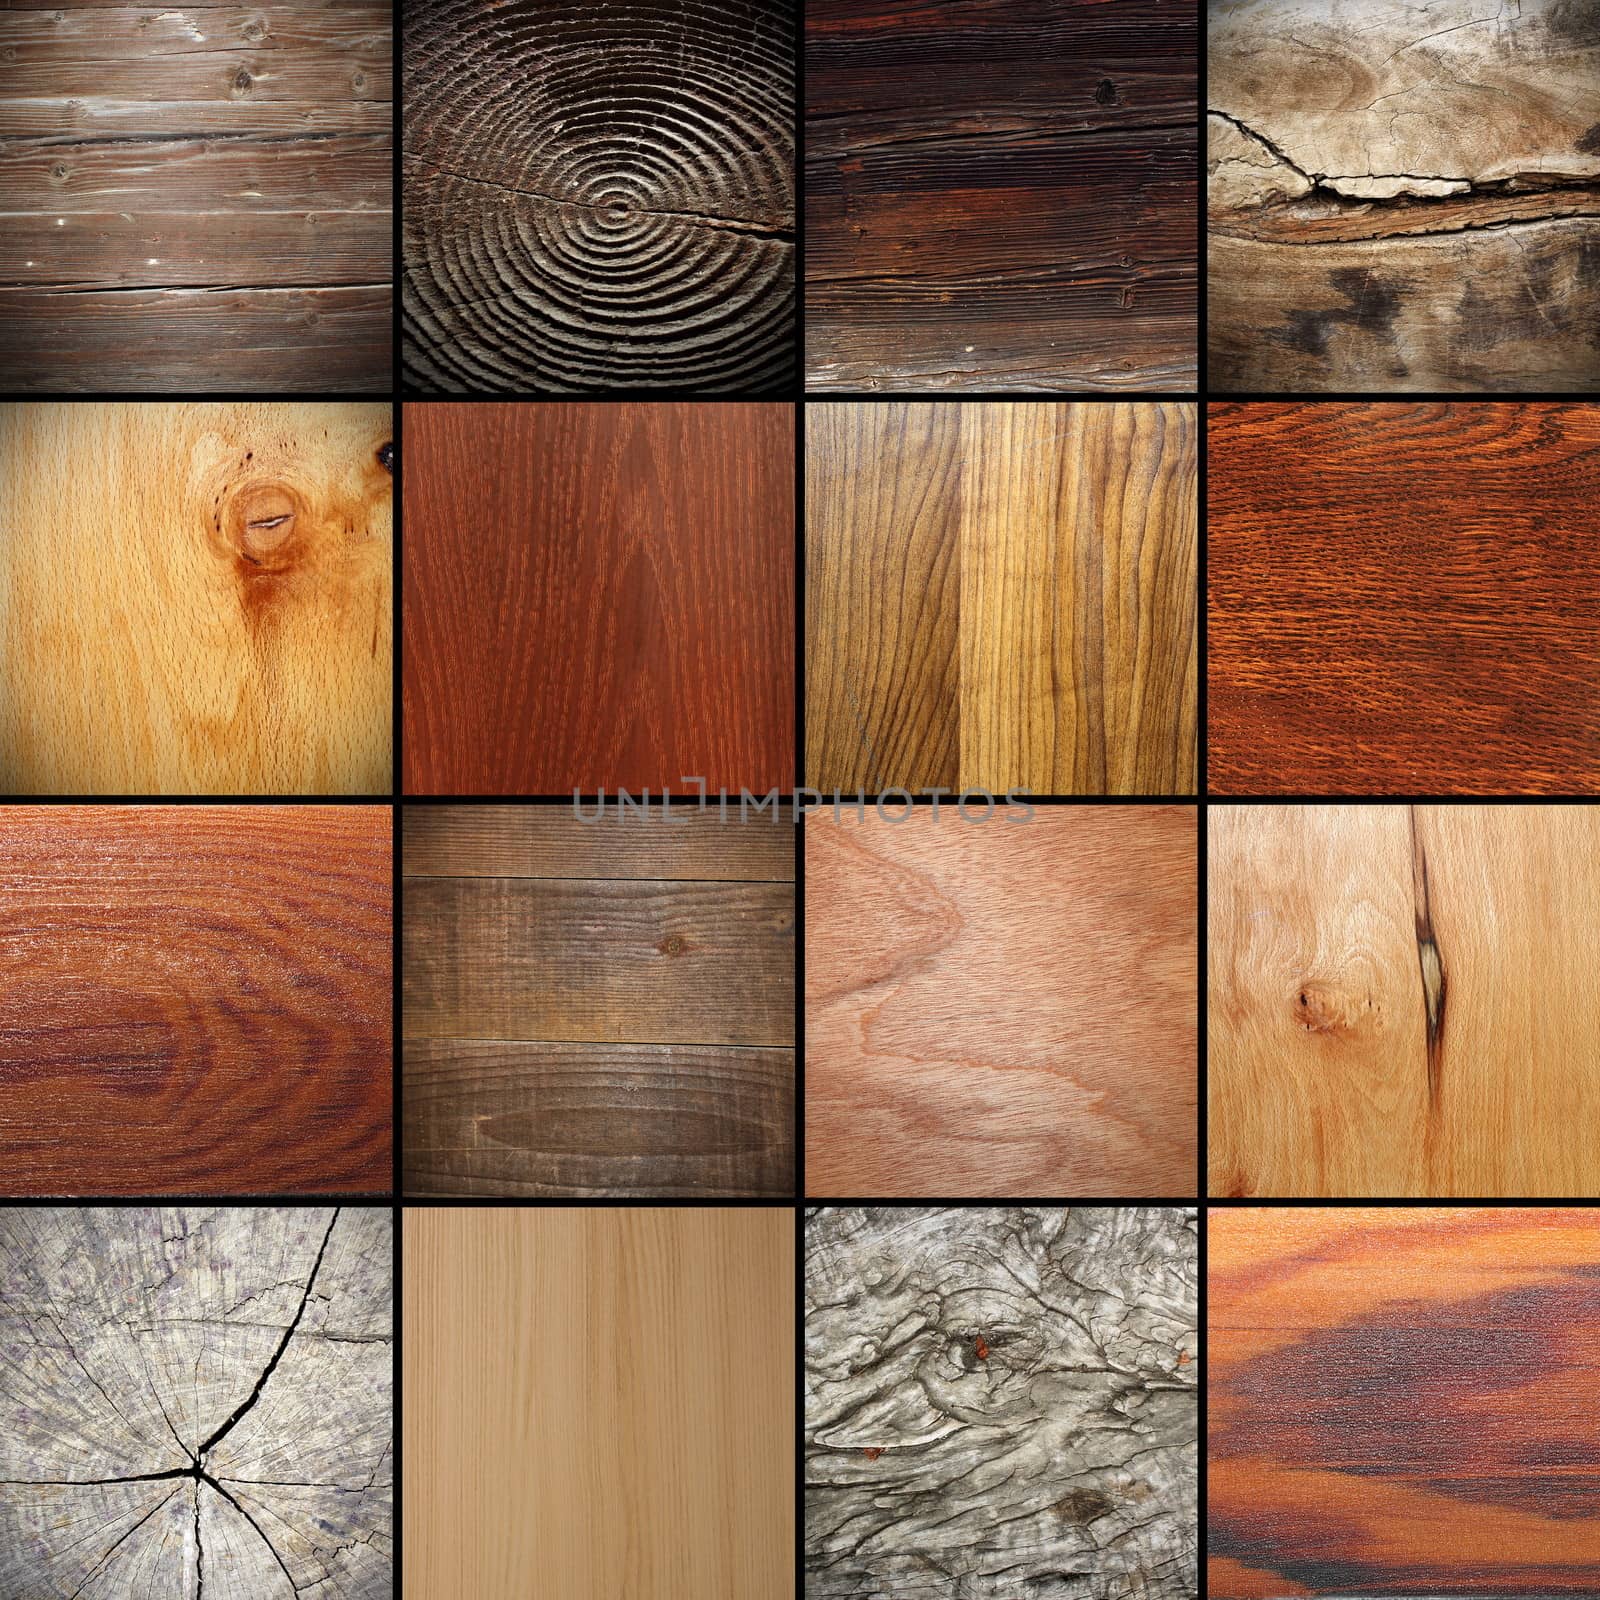 large collection of real beautiful wooden  textures